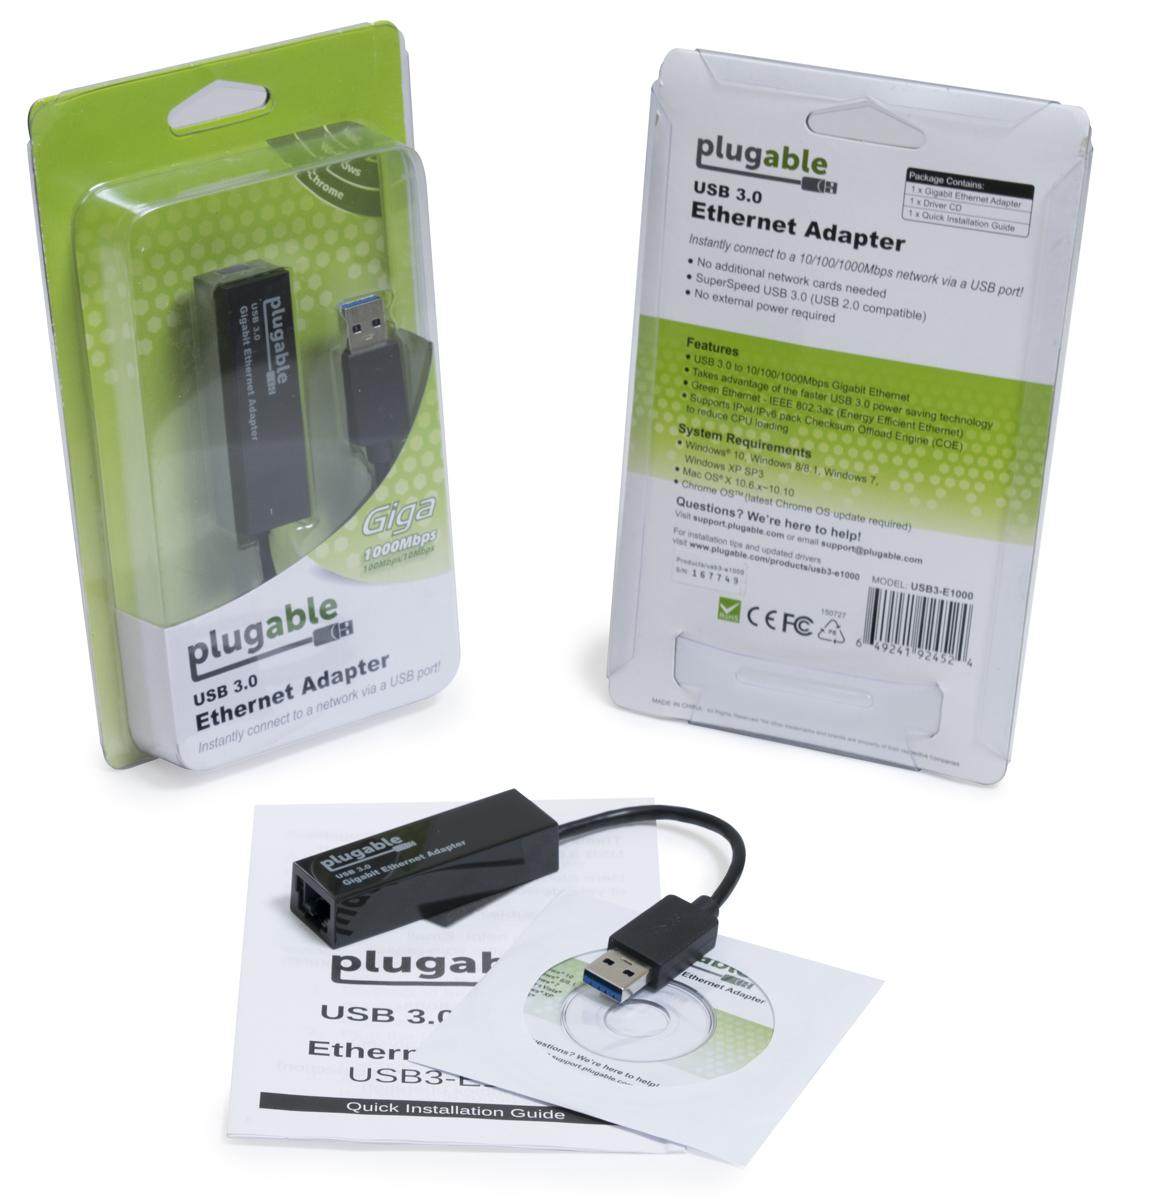 USB3-E1000 with packaging and package contents